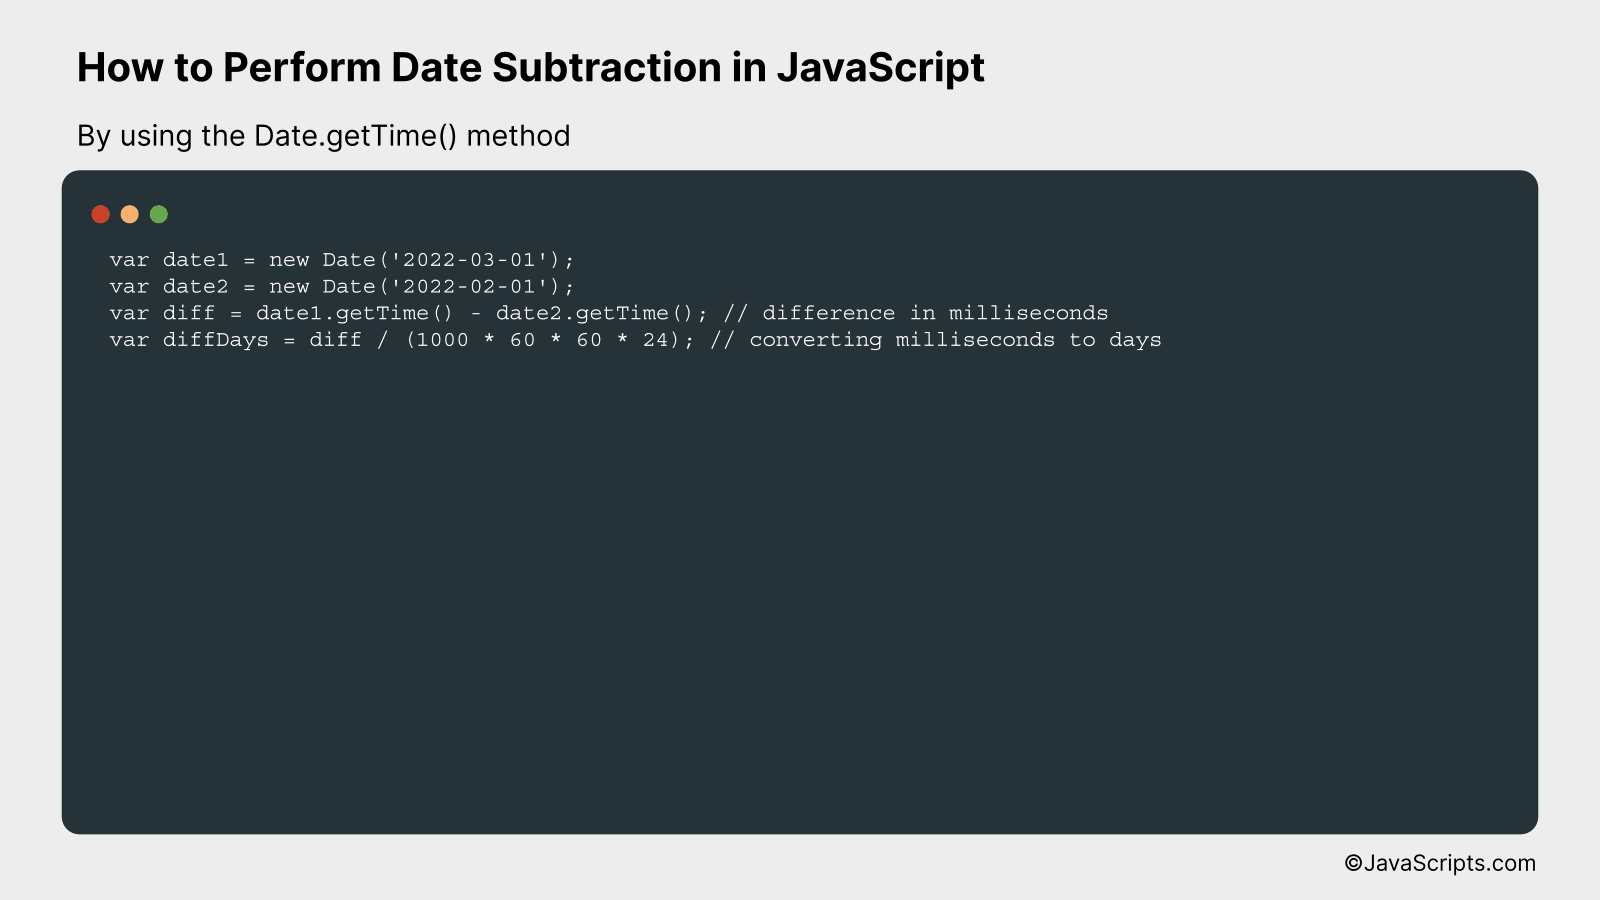 By using the Date.getTime() method